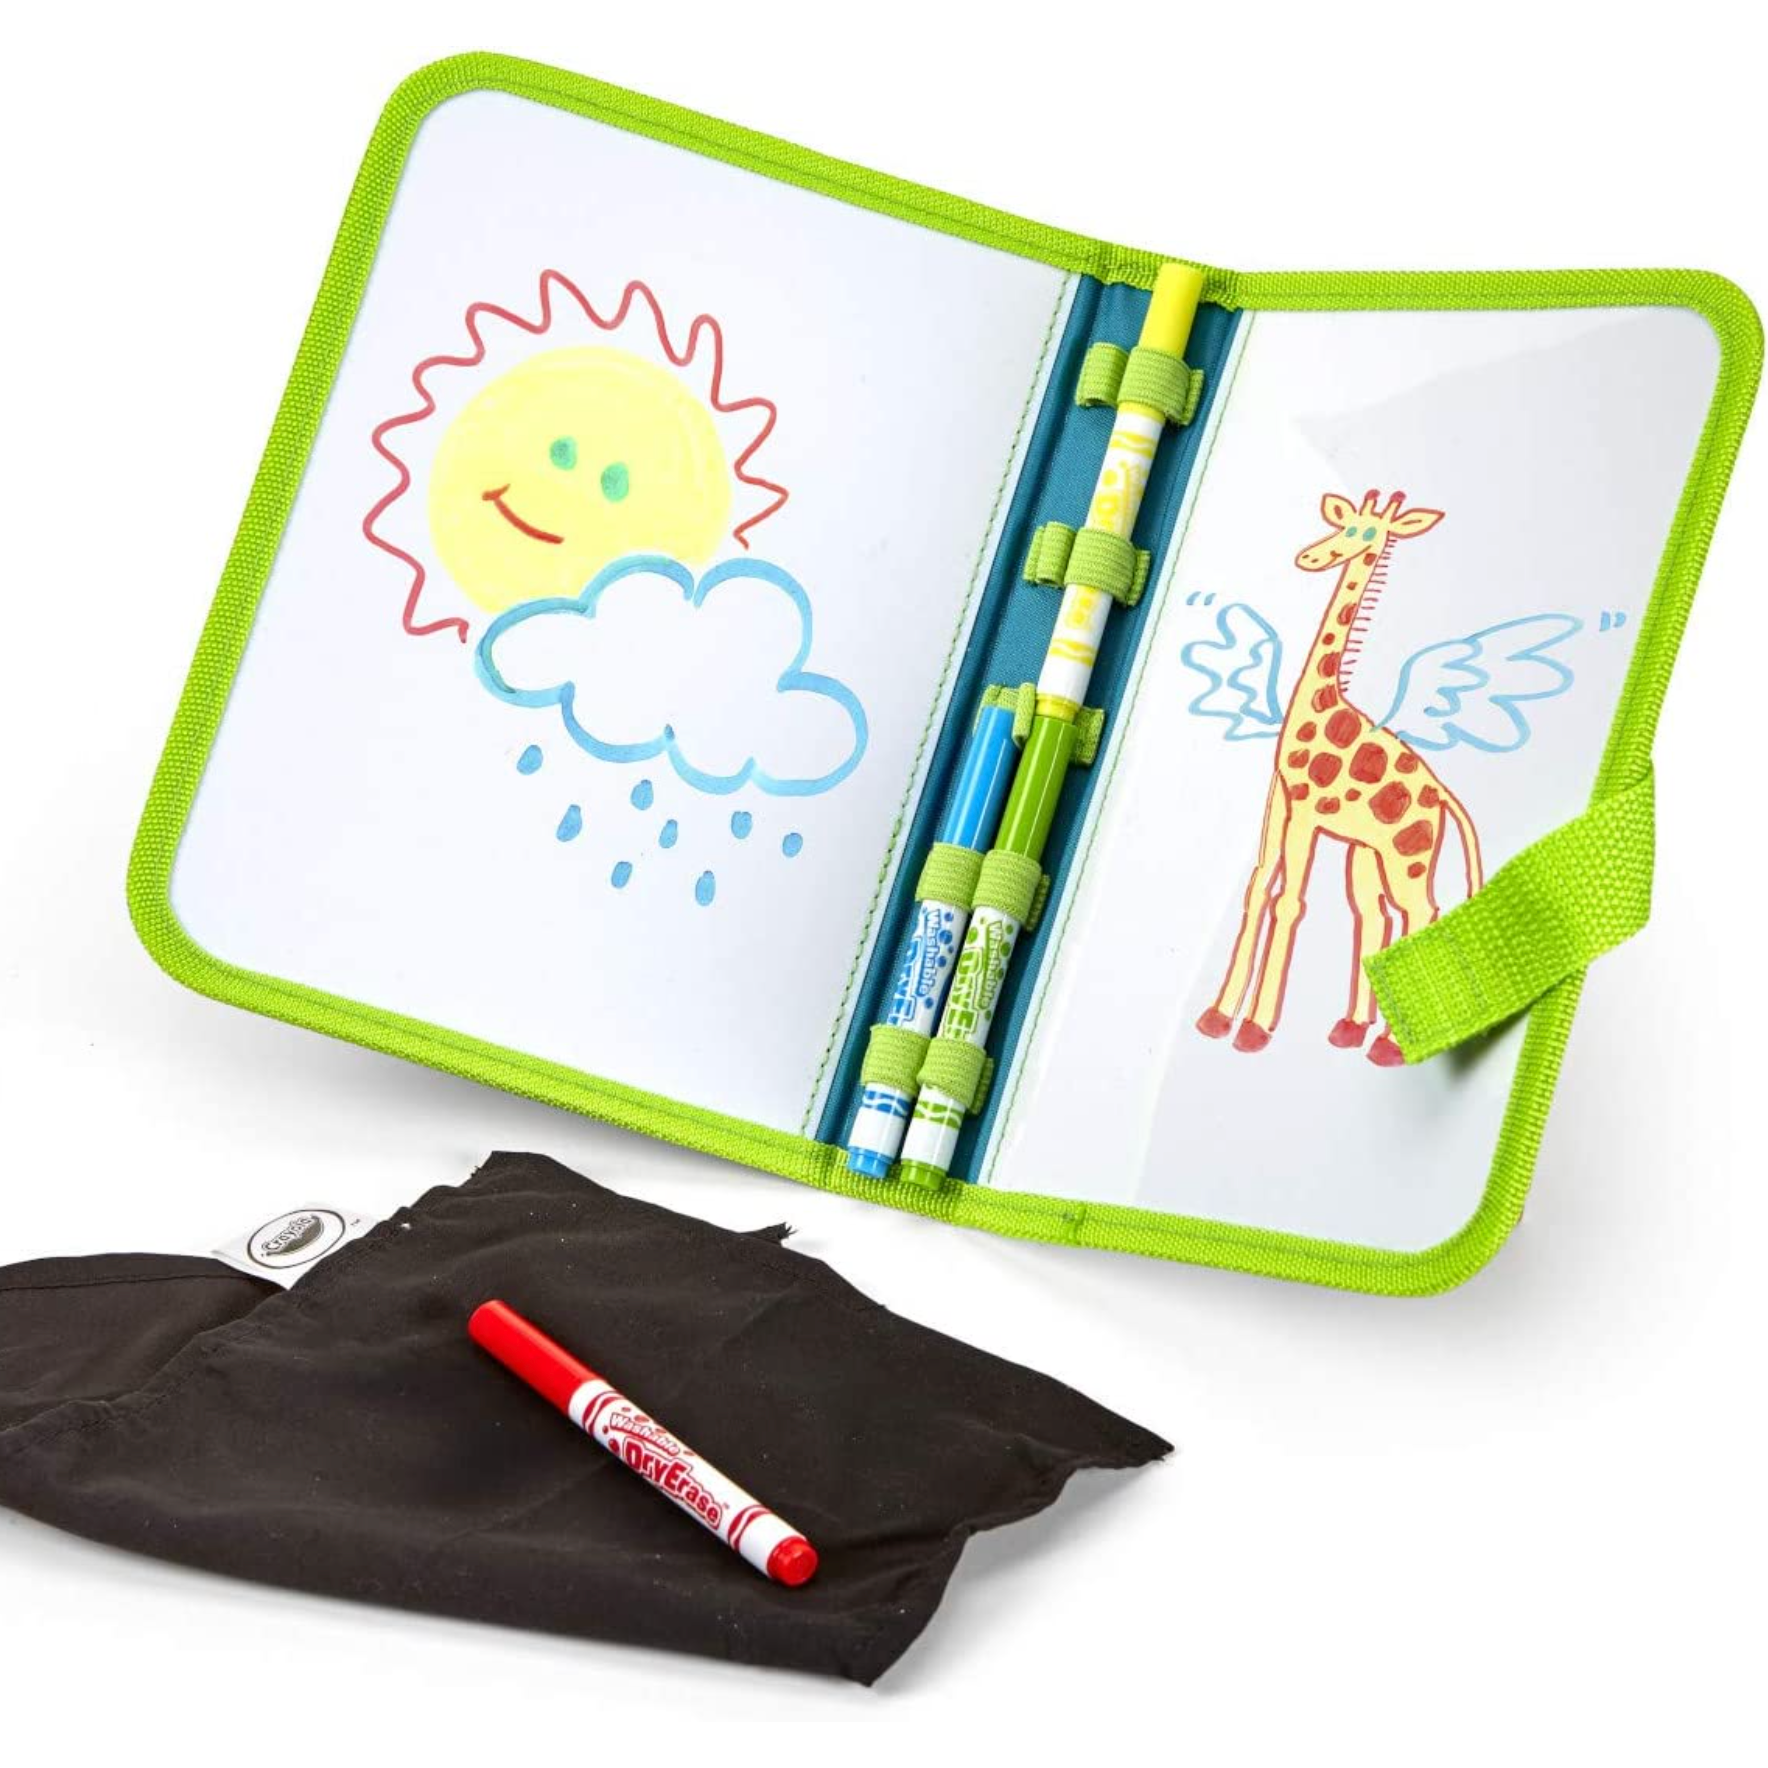 Dry Erase Travel Pack with Markers